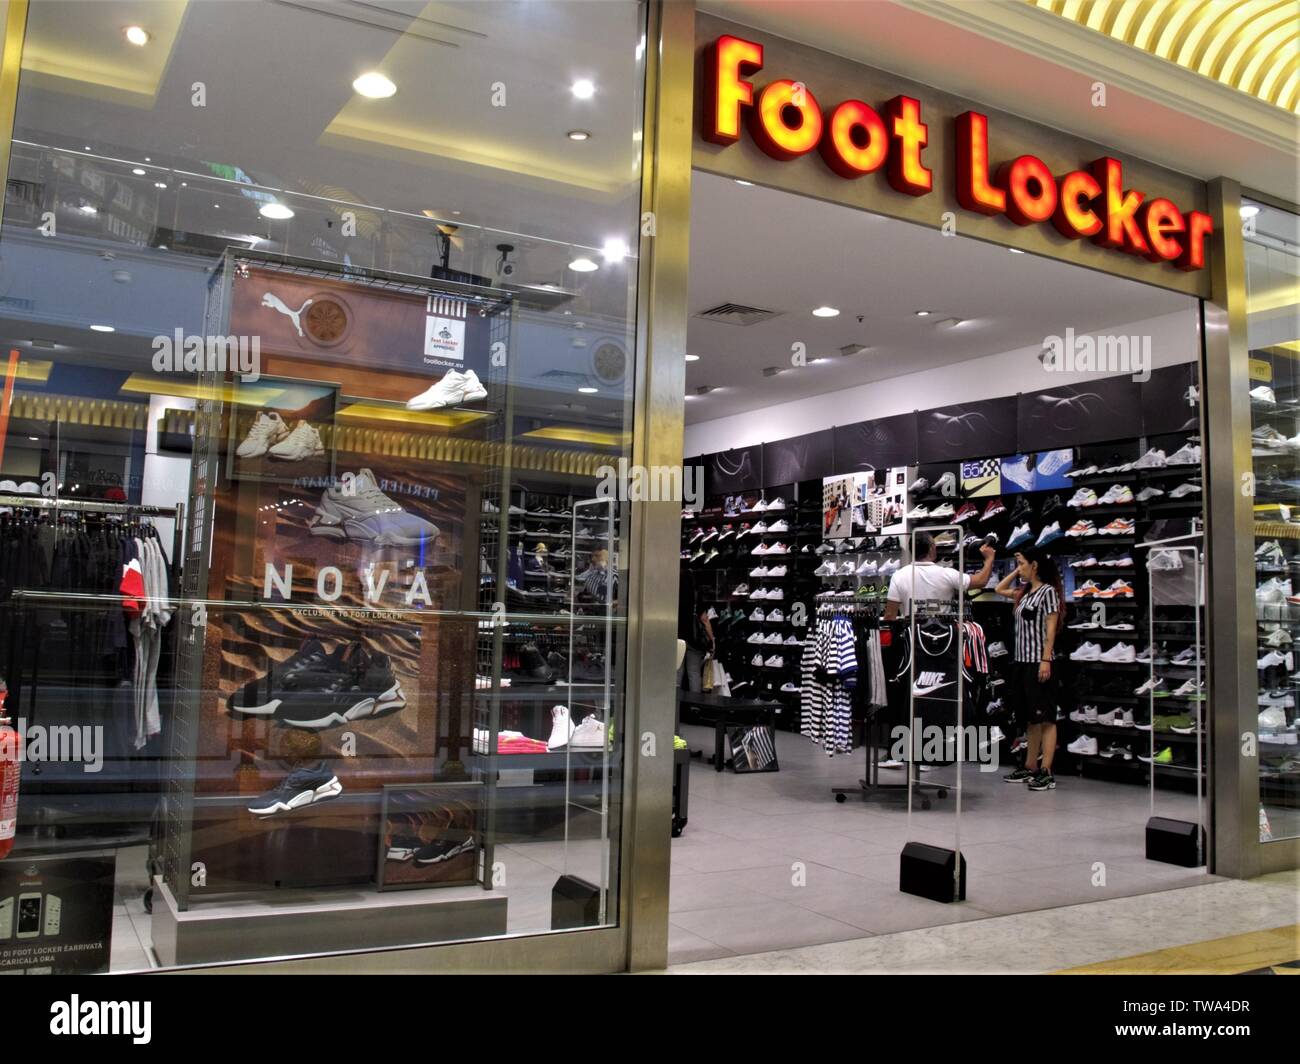 FOOT LOCKER CALZATURE FASHION STORE IN INGRESSO EUROMA 2 SHOPPING CENTER A  ROMA Foto stock - Alamy